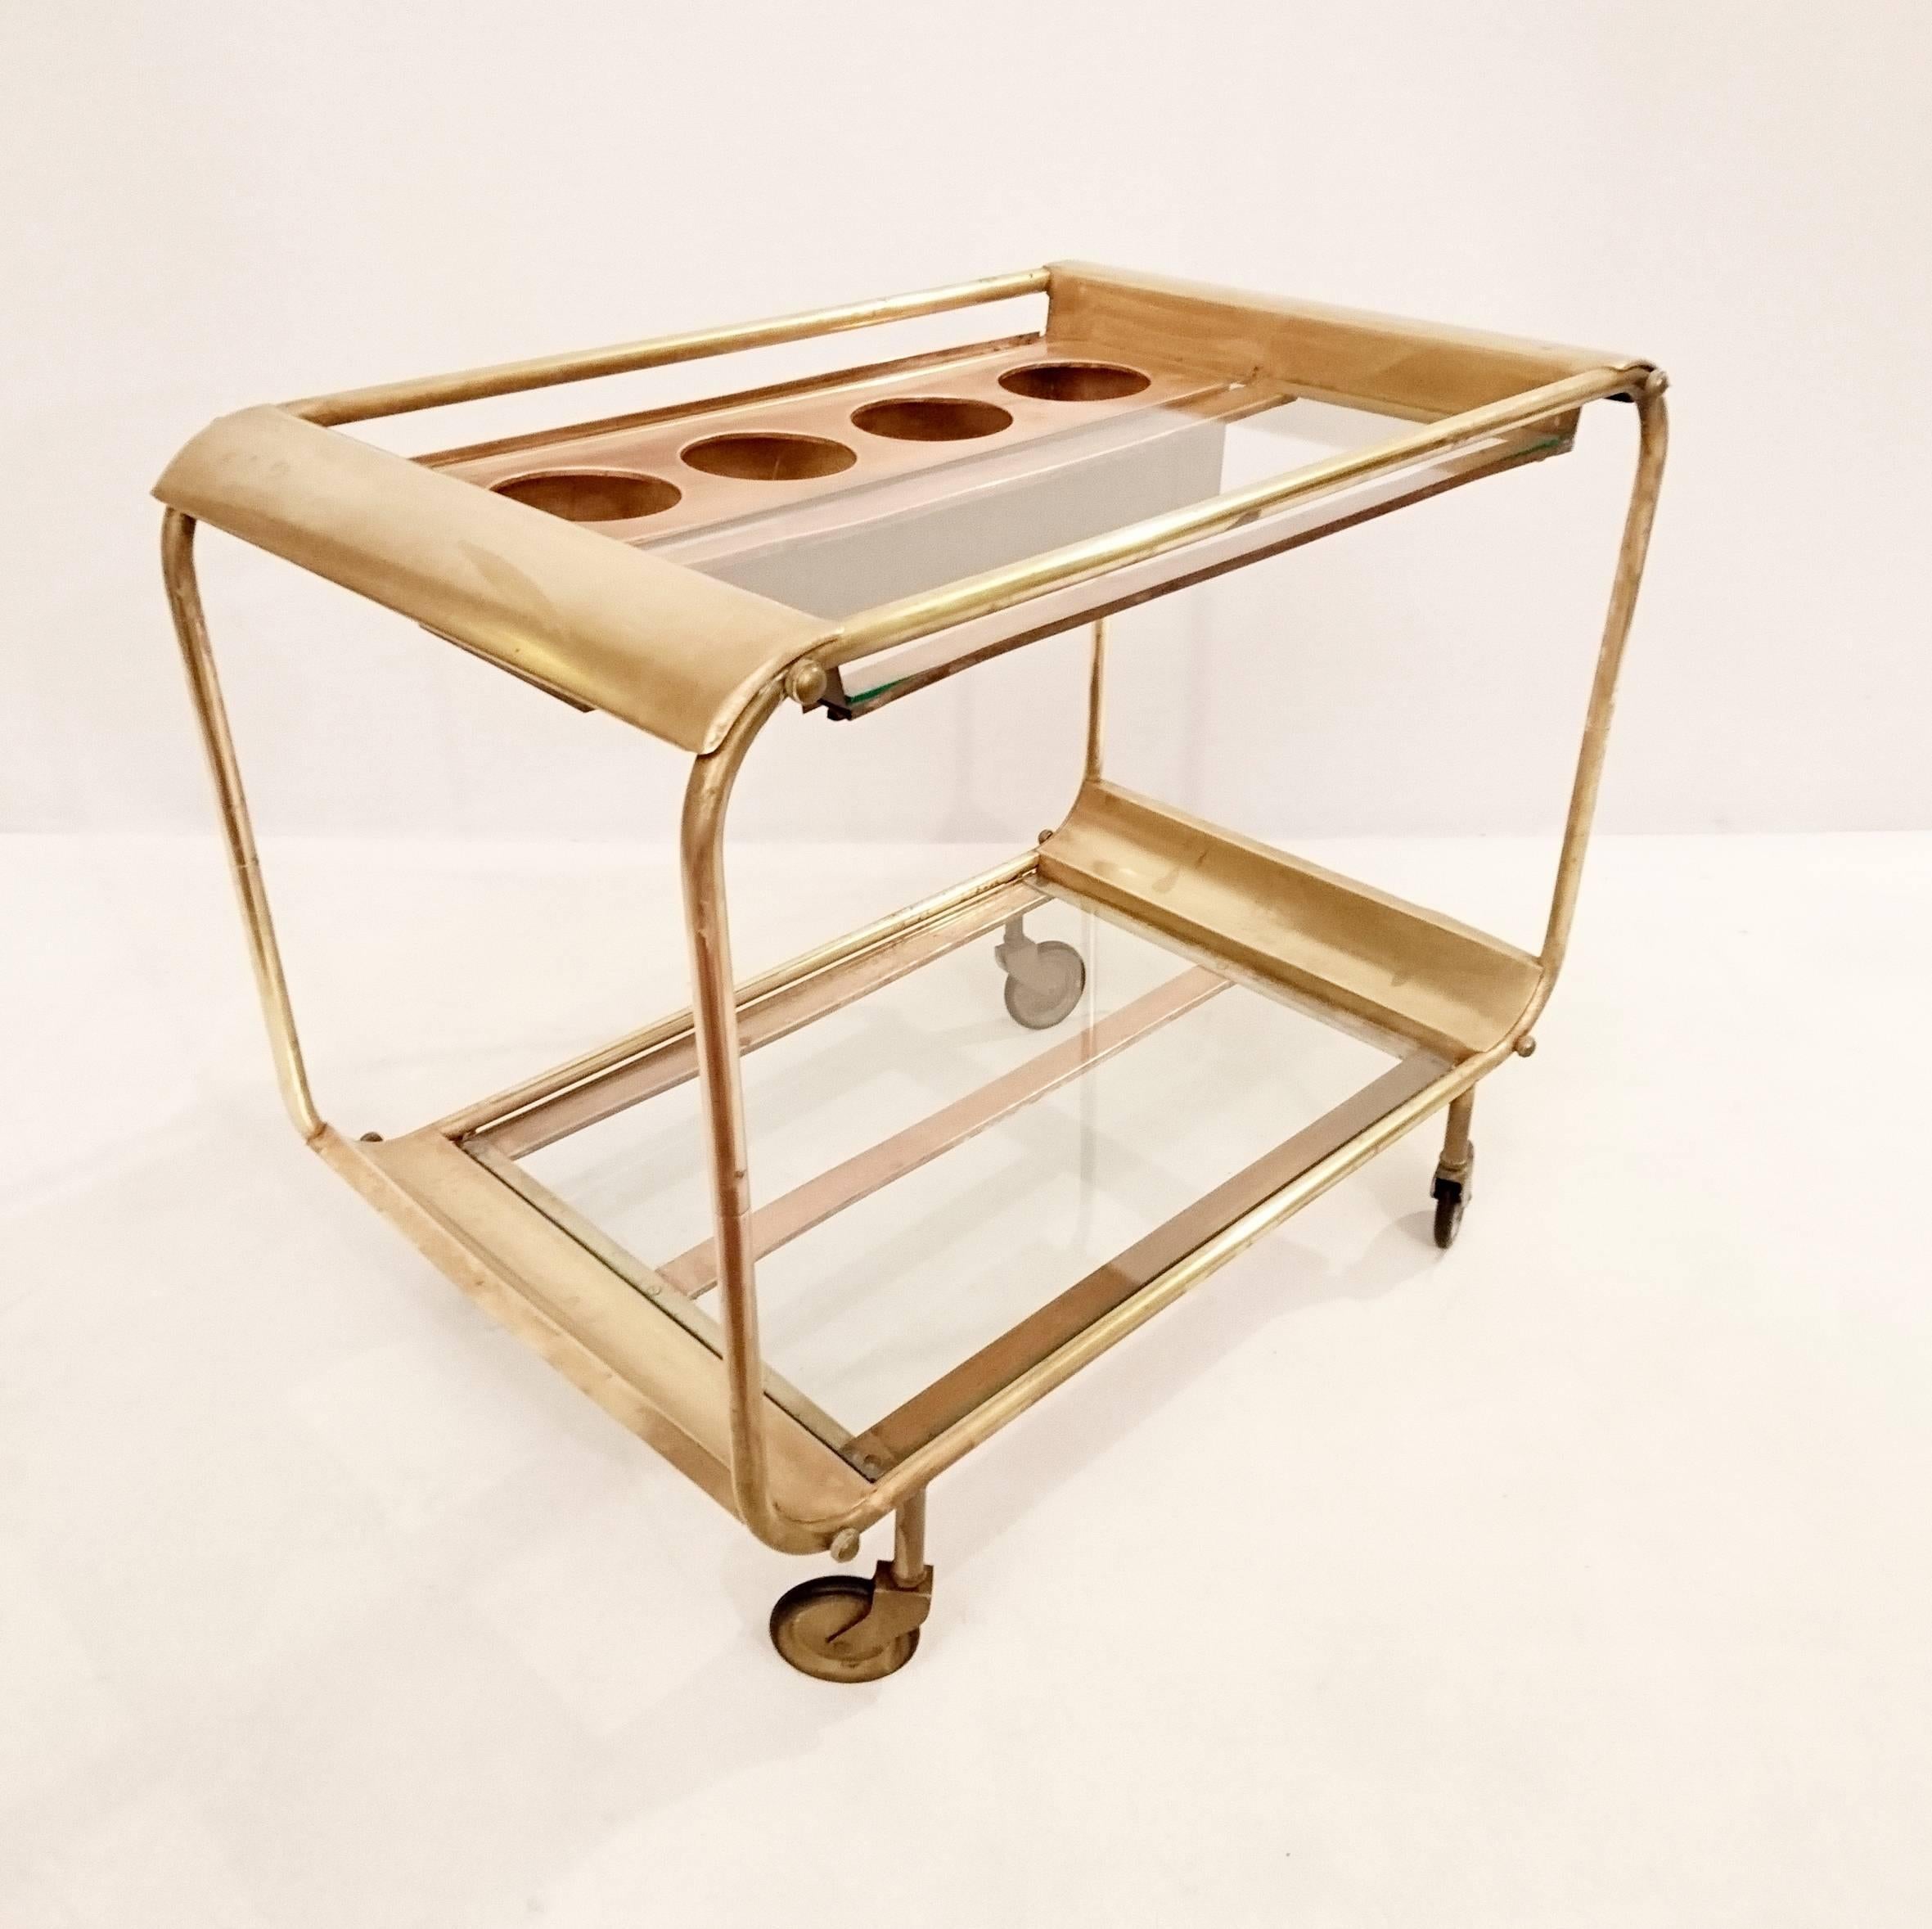 Unique and beautiful trolley from the late 1920s or early 1930s in distinct Art Deco style clearly reminiscent of Bauhaus. Made in both copper, brass and glass with a bottle holder on top with room for four bottles.